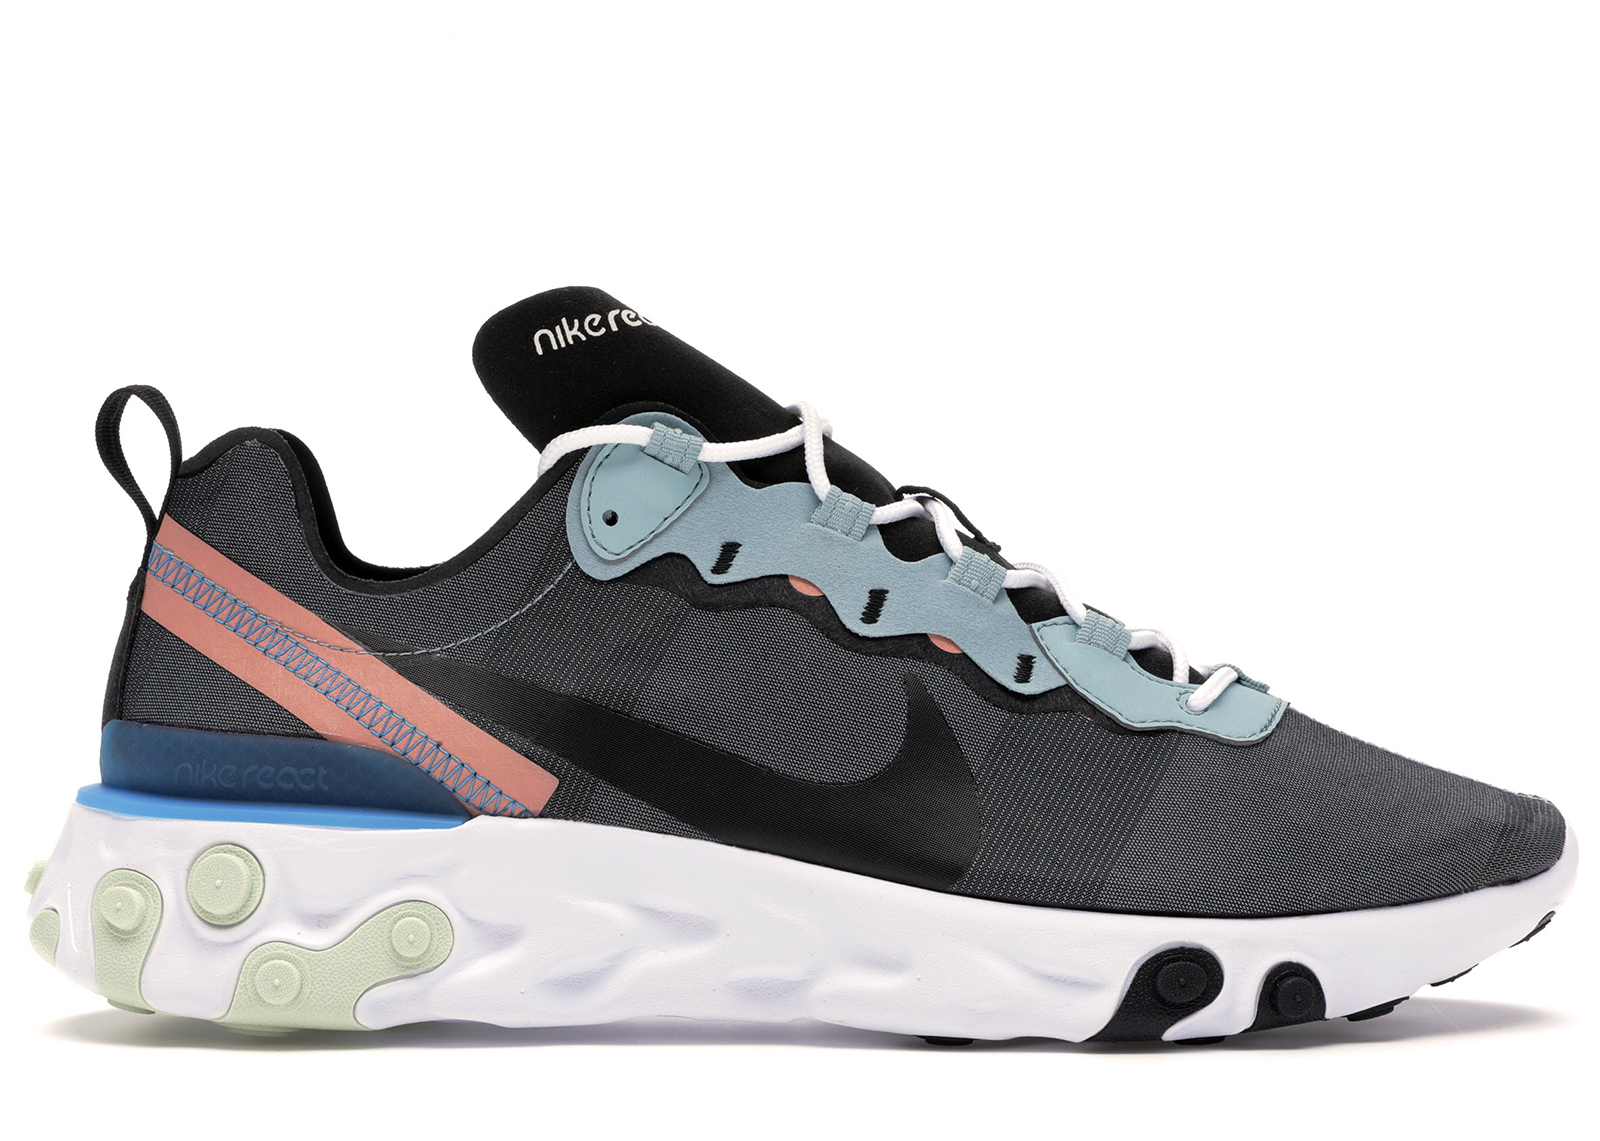 nike react element 55 pink and black